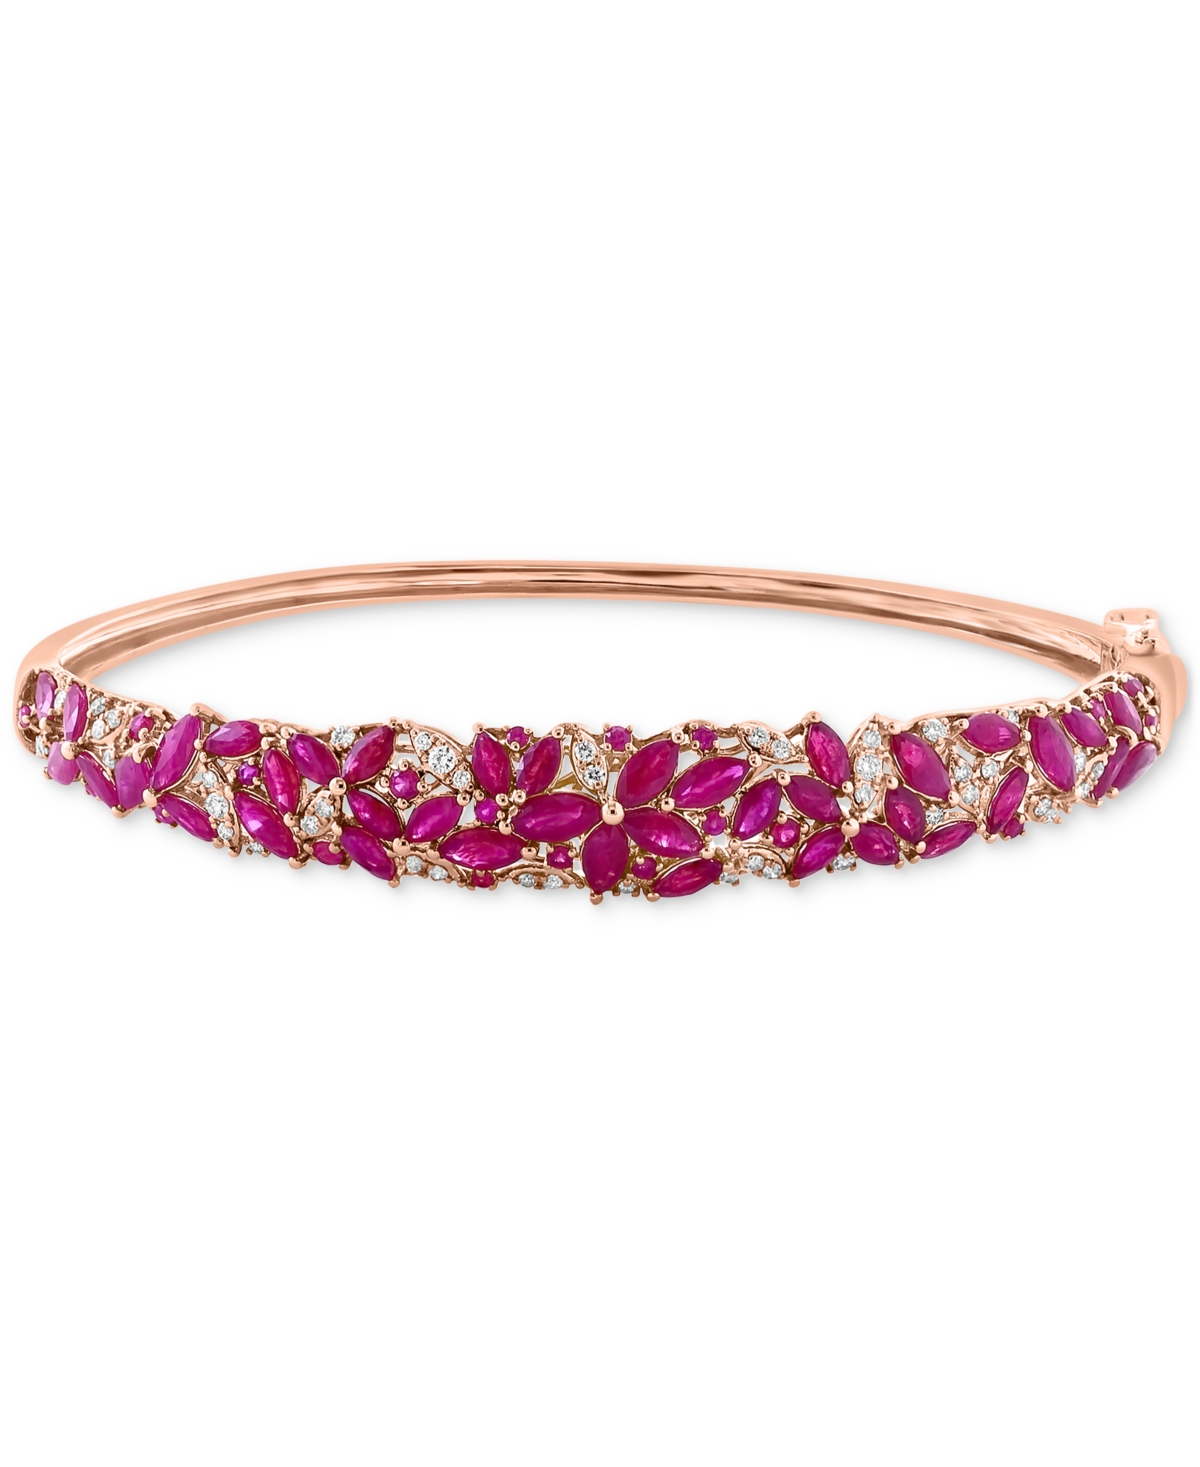 Effy Collection Effy Ruby (4-7/8 Ct. T.w.) & Diamond (1/3 Ct. T.w.) Cluster Bangle Bracelet In 14k Rose Gold